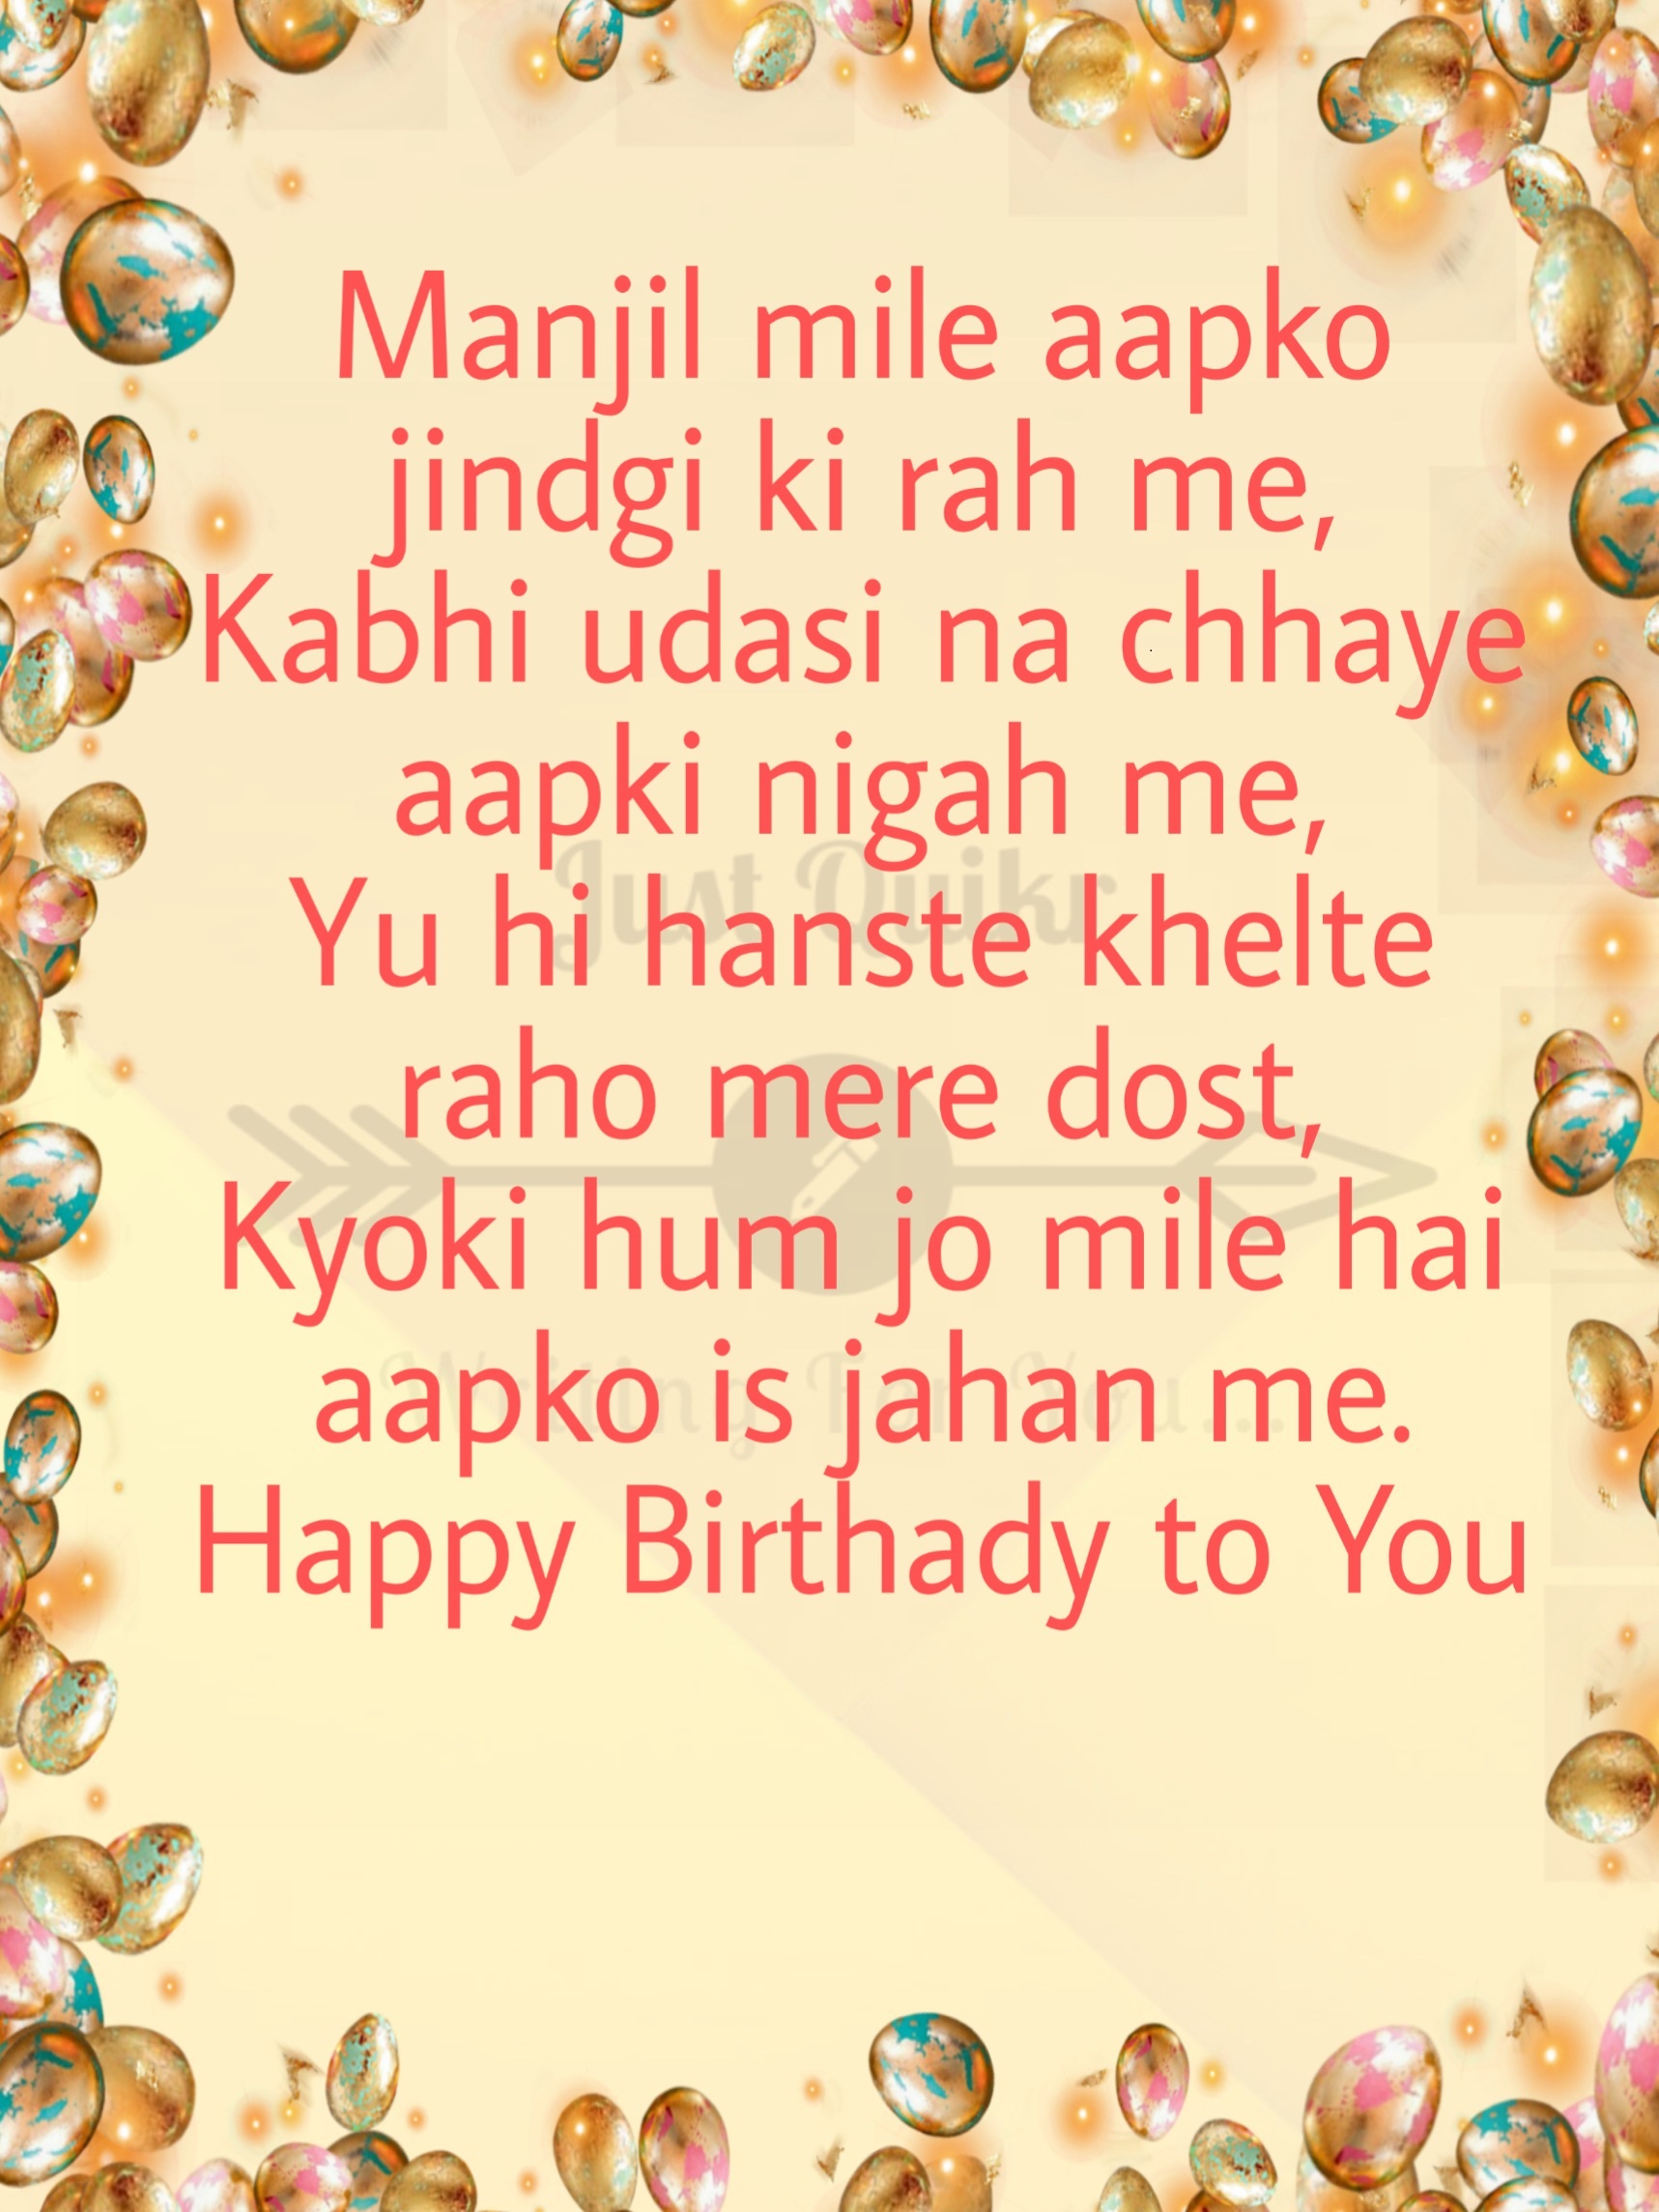 Creative Happy Birthday Wishes Thoughts Quotes Lines Messages in English for Friend in Status